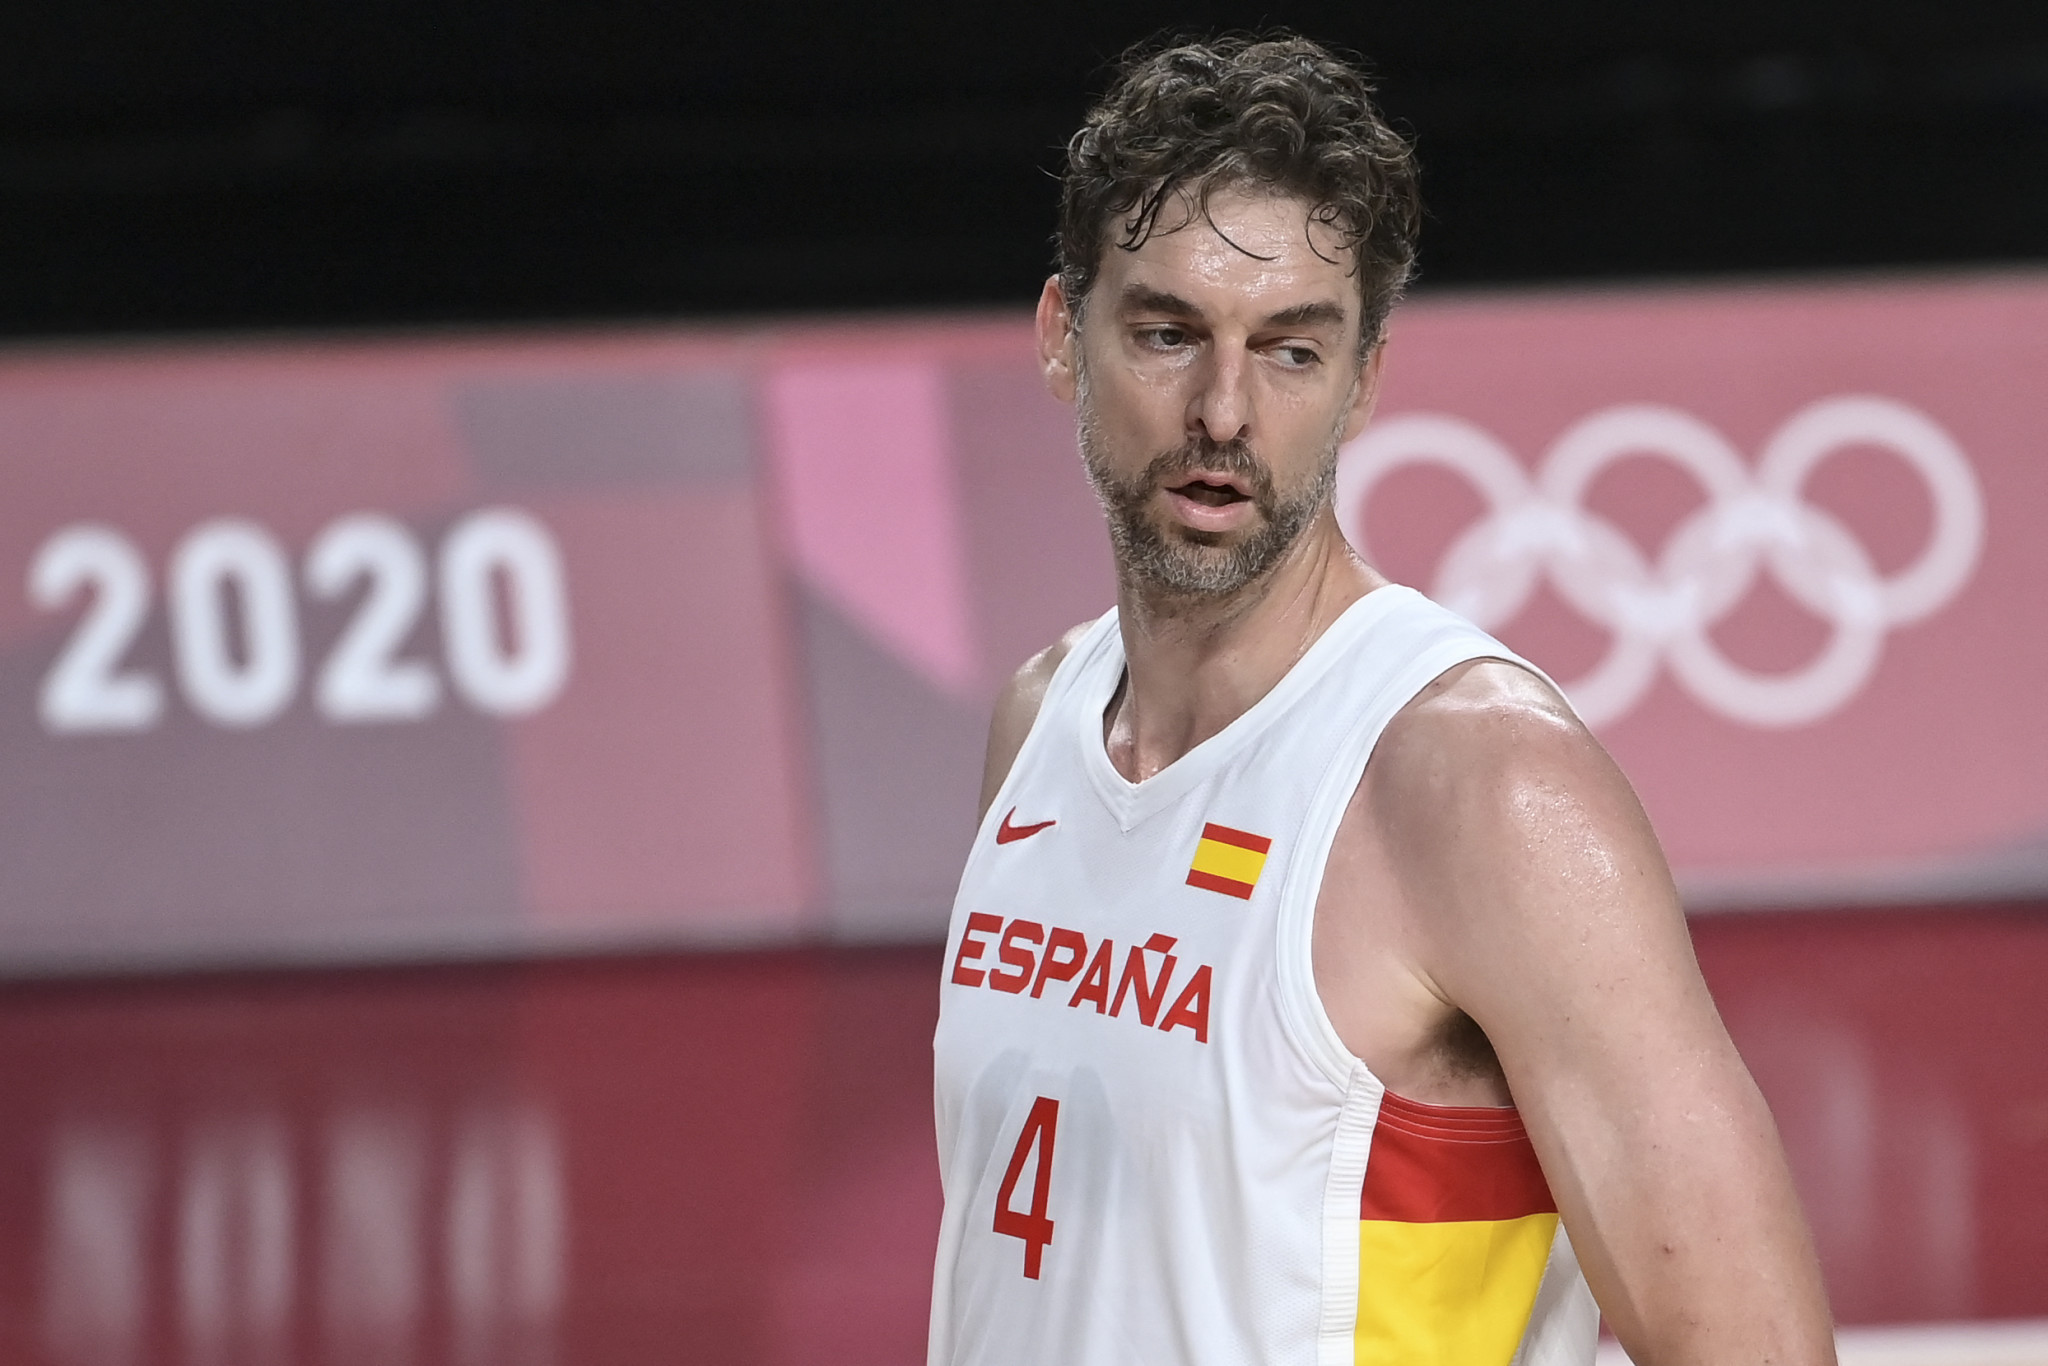 NBA - Pau Gasol: What other foreign players have had their jerseys